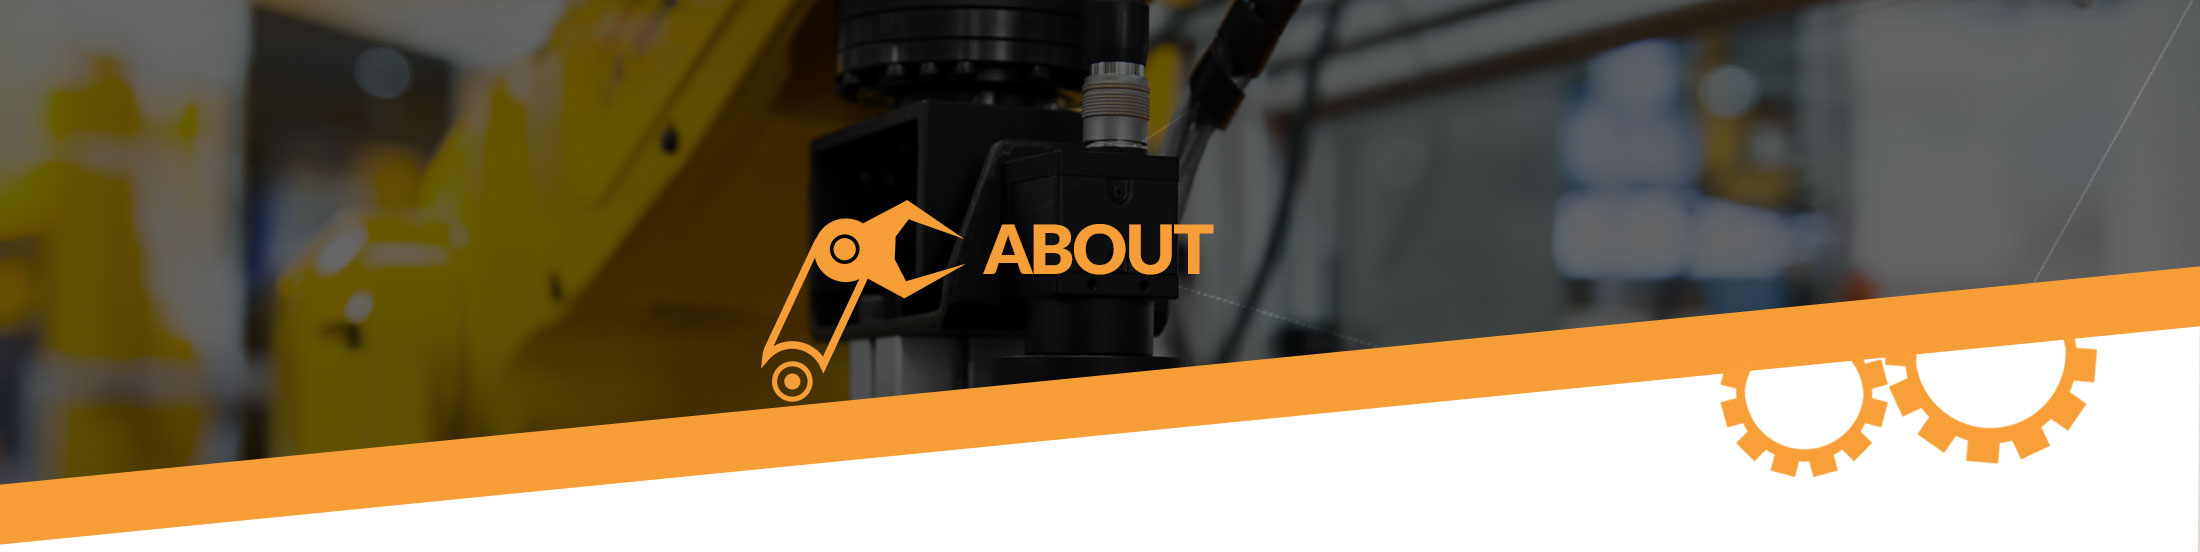 Icon Automation provides robotic process automation solutions for the manufacturing industry.